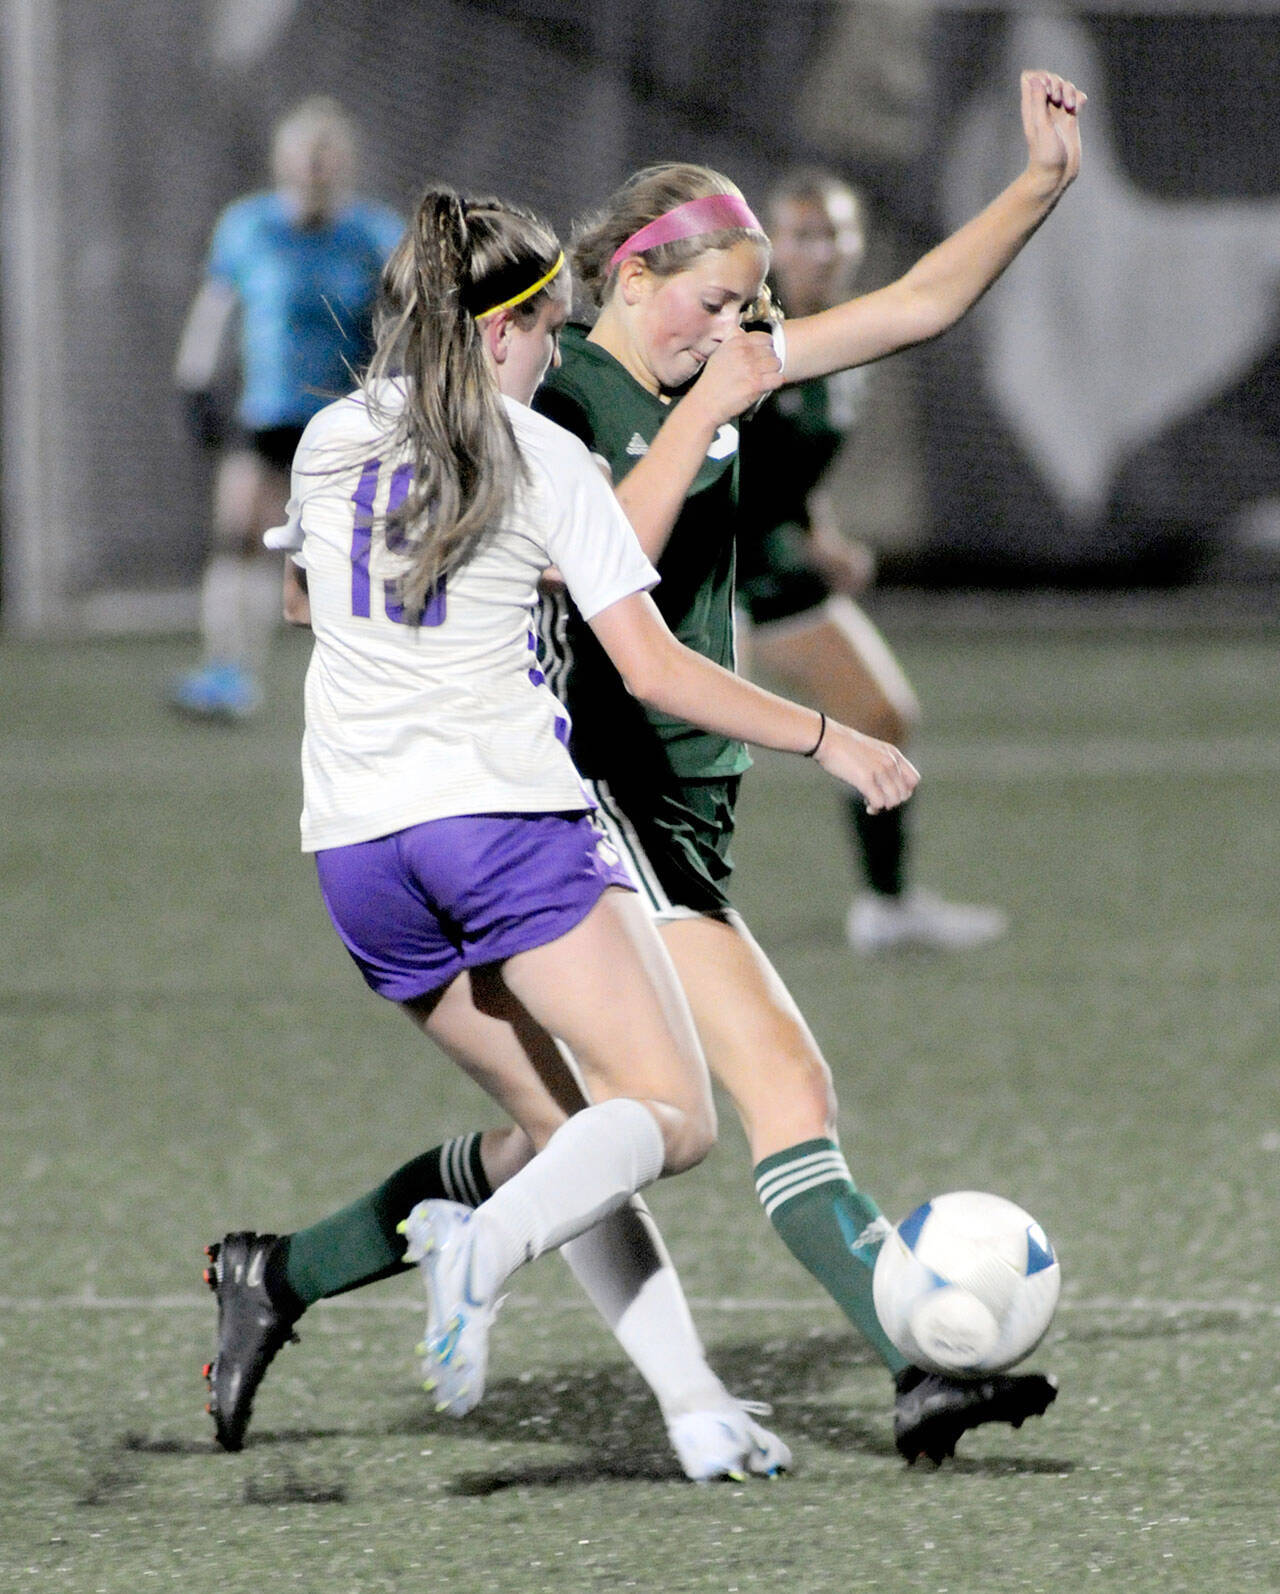 Port Angeles’ Becca Manson, right, steals the ball from North Kitsap’s Jenna Clarke on Tuesday night in Port Angeles. (Keith Thorpe/Peninsula Daily News)